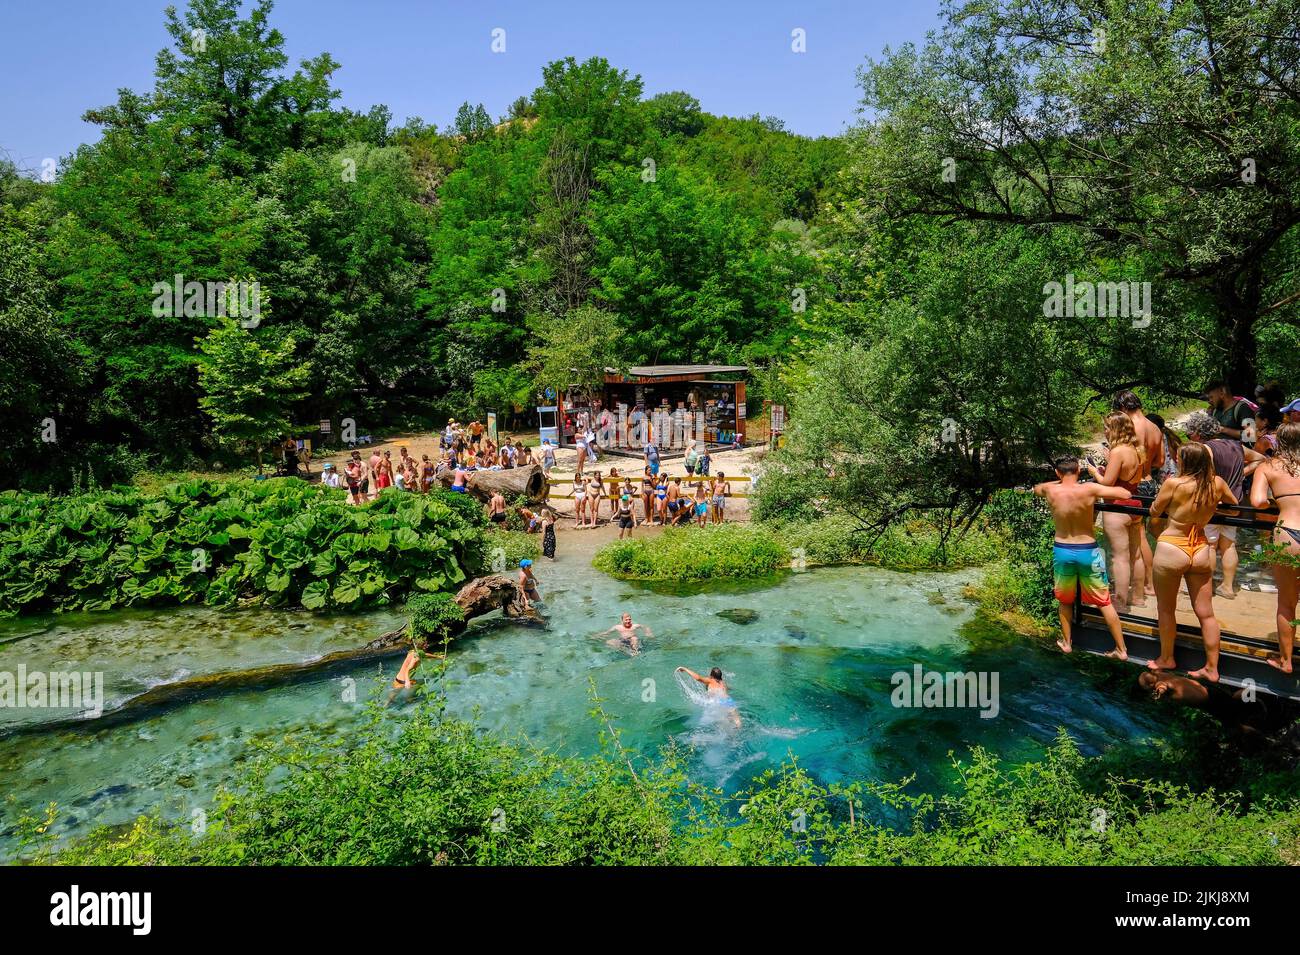 Muzina, Albania - Tourists bathe in Syri i Kaltër, THE BLUE EYE is the country's most abundant water source with 6 ö³/s, located midway between the larger cities of Saranda on the coast and Gjirokastra inland. Stock Photo